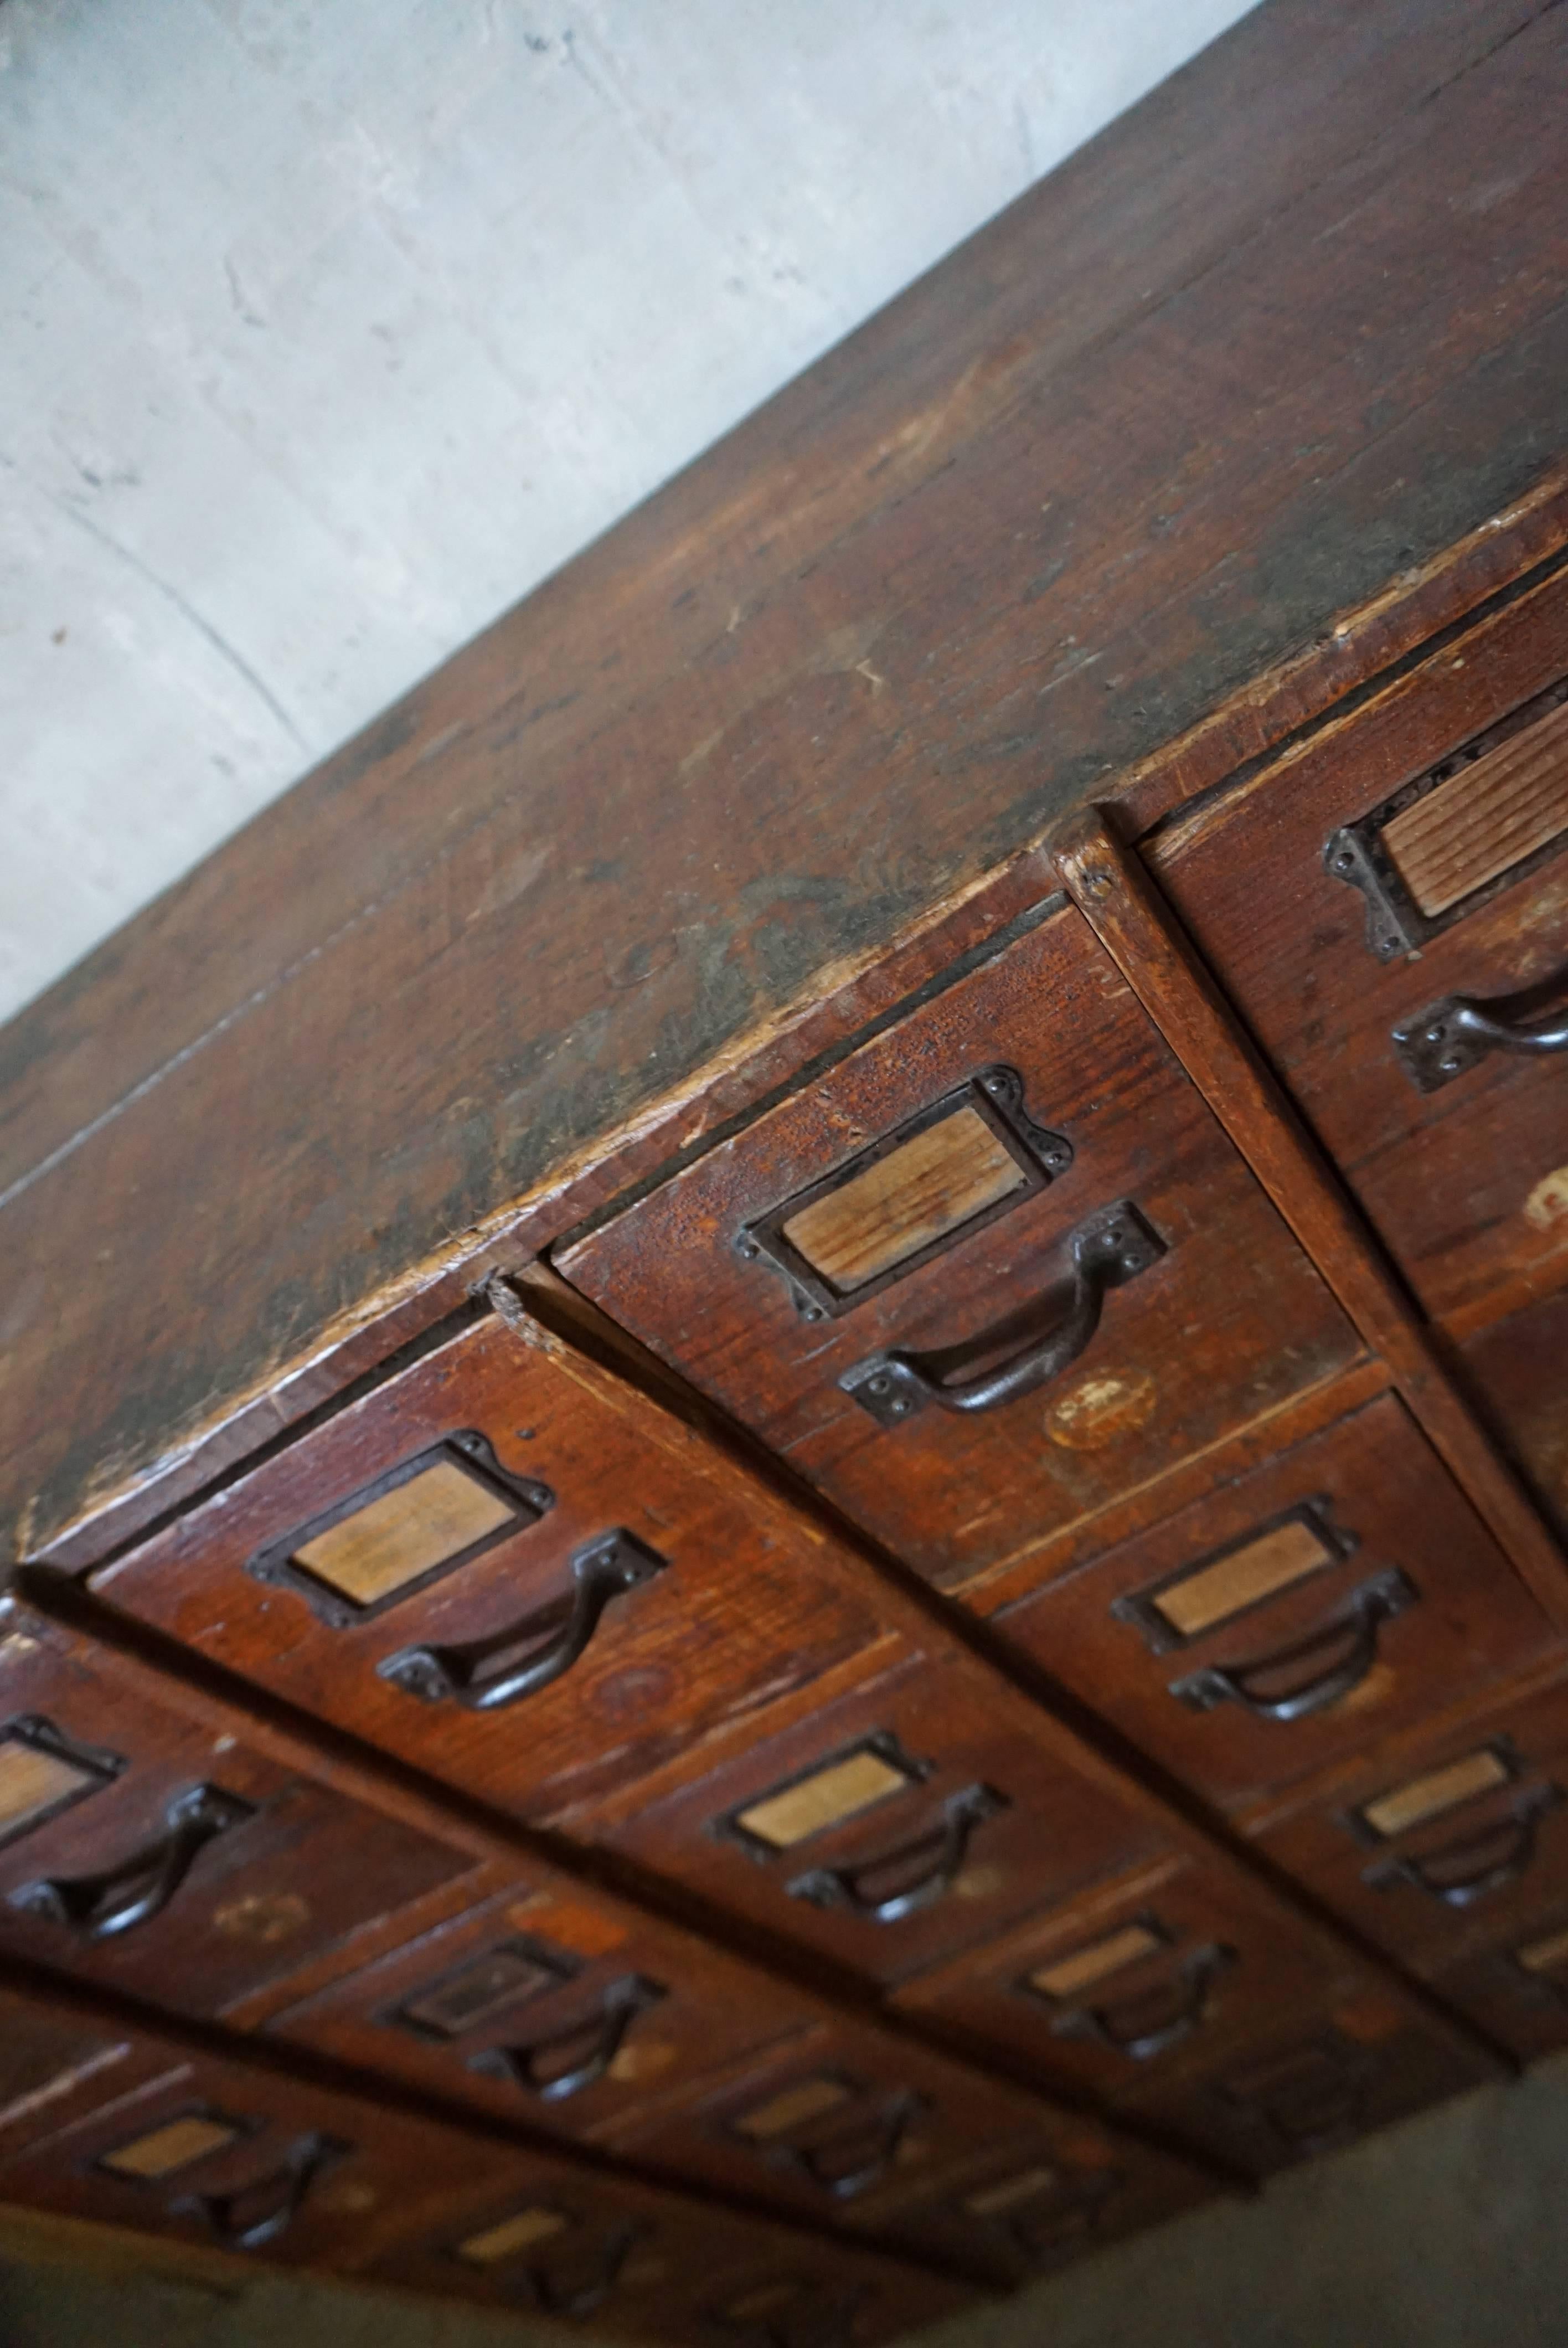 This apothecary bank of drawers was designed and made circa 1900. It is made from pine with iron handles. The cabinet has retained a rich patina with some natural distressing.